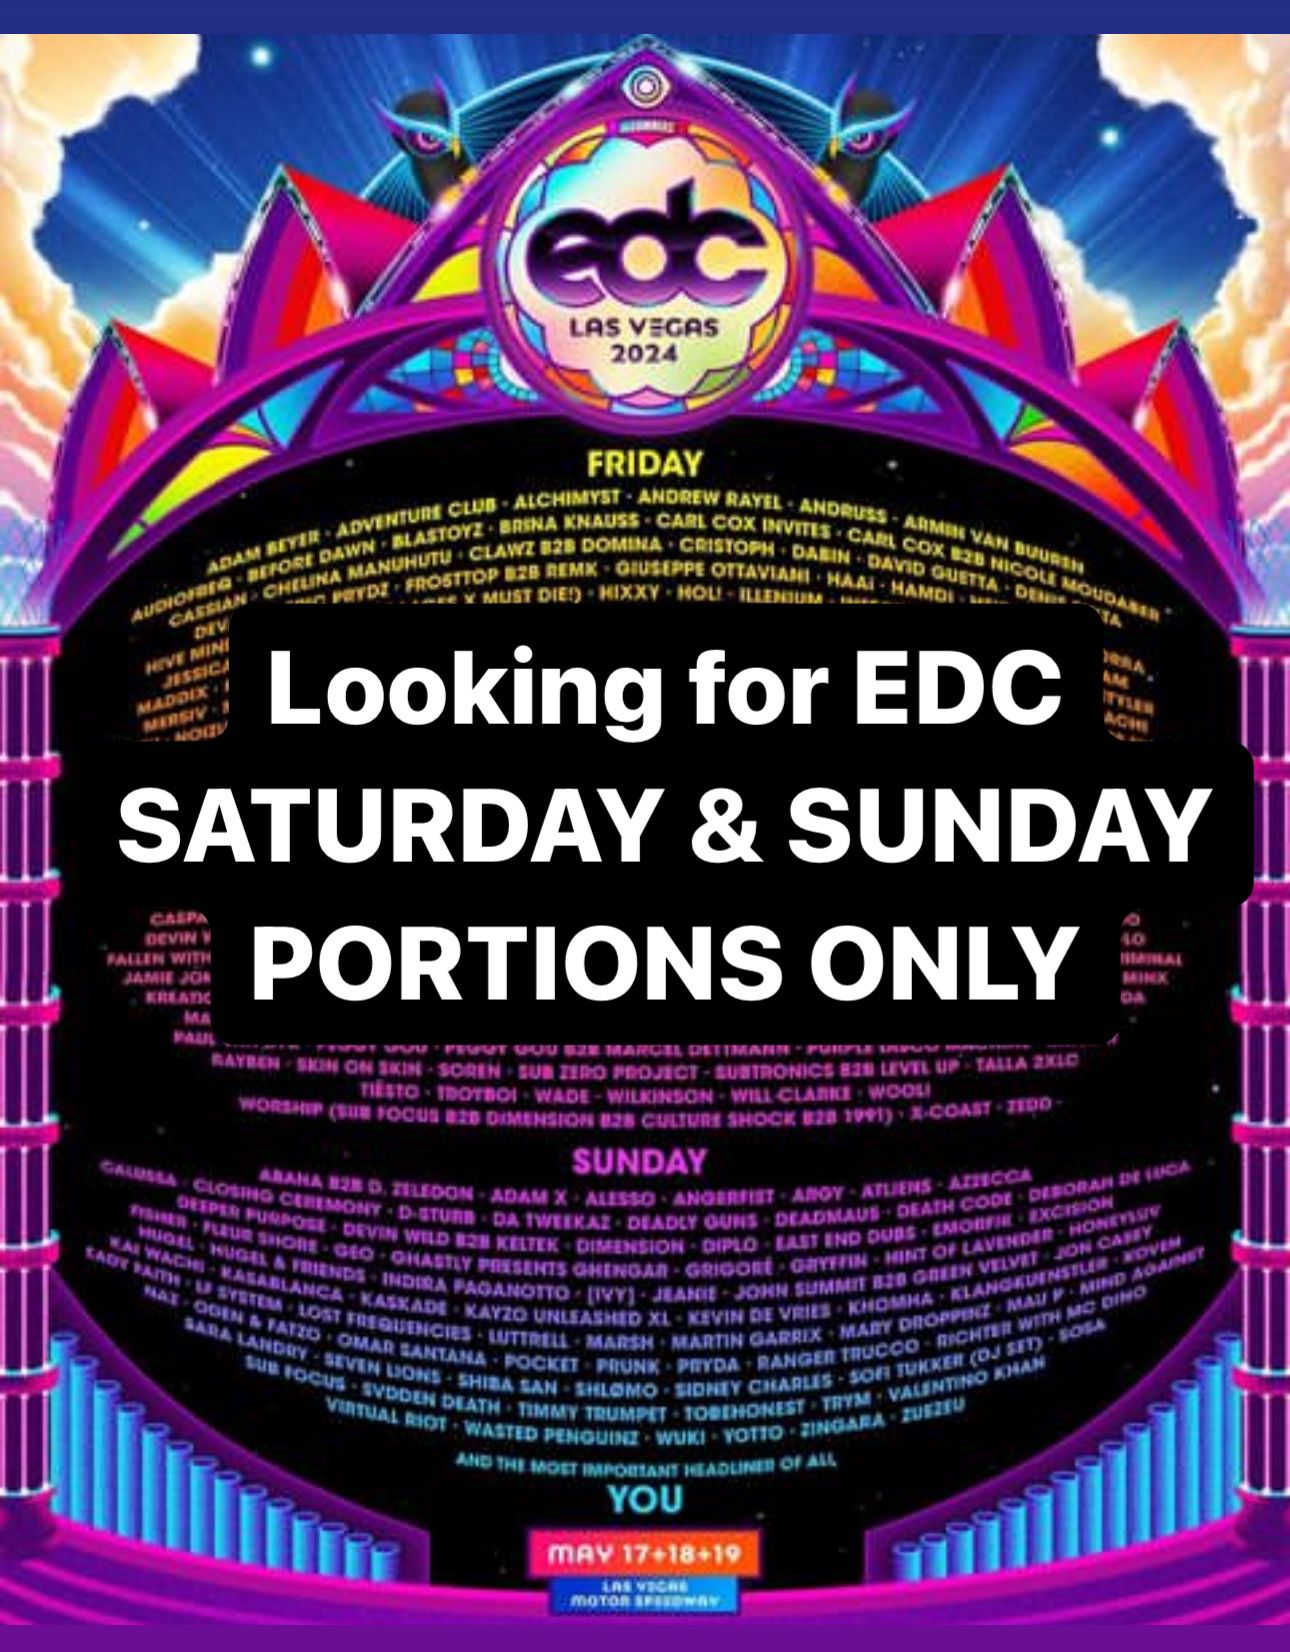 EDC SATURDAY & SUNDAY PORTIONS only